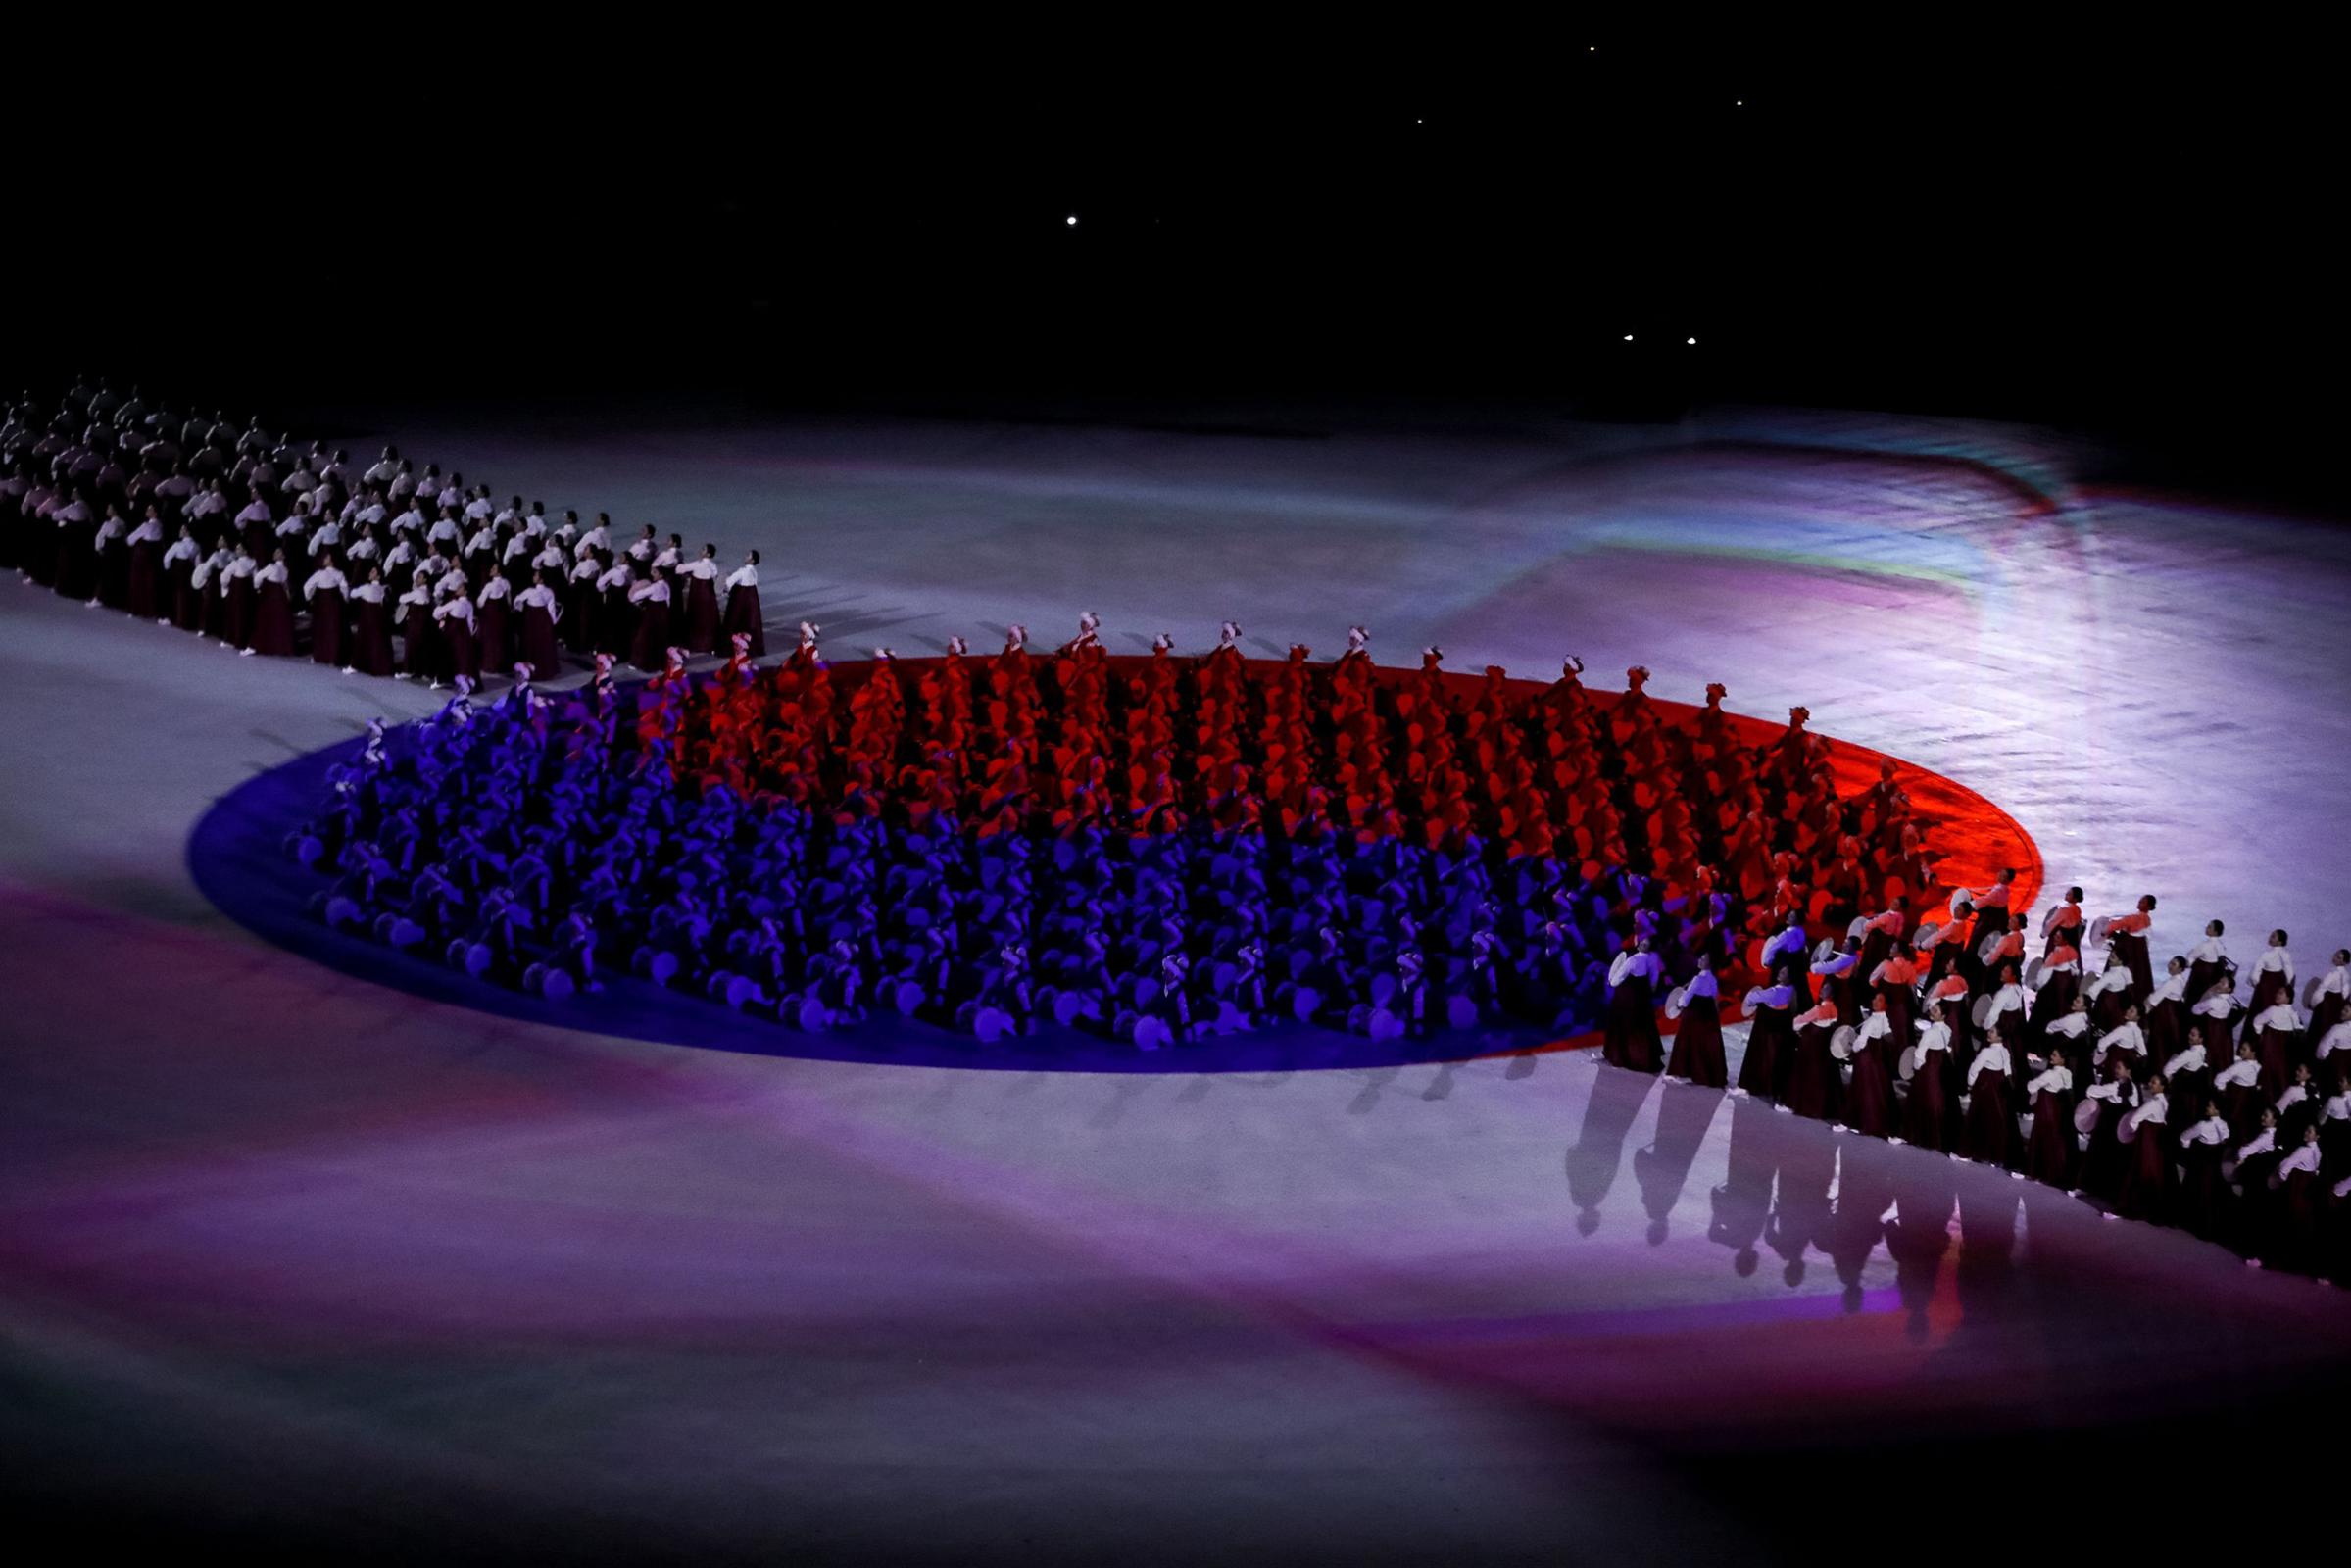 Participants form the South Korean flag during the opening ceremony of the Pyeongchang 2018 Winter Olympic Games.